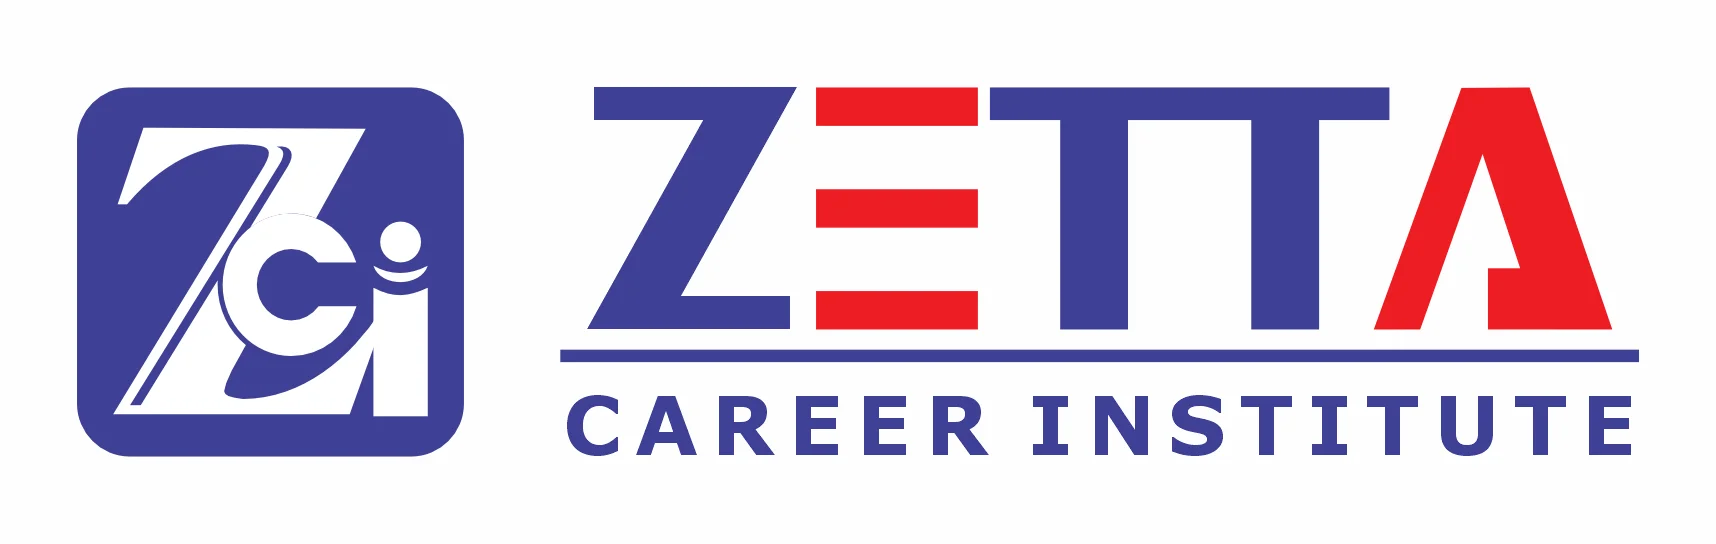 Image featuring the logo of Zetta Career Institute, representing excellence in education and career development.